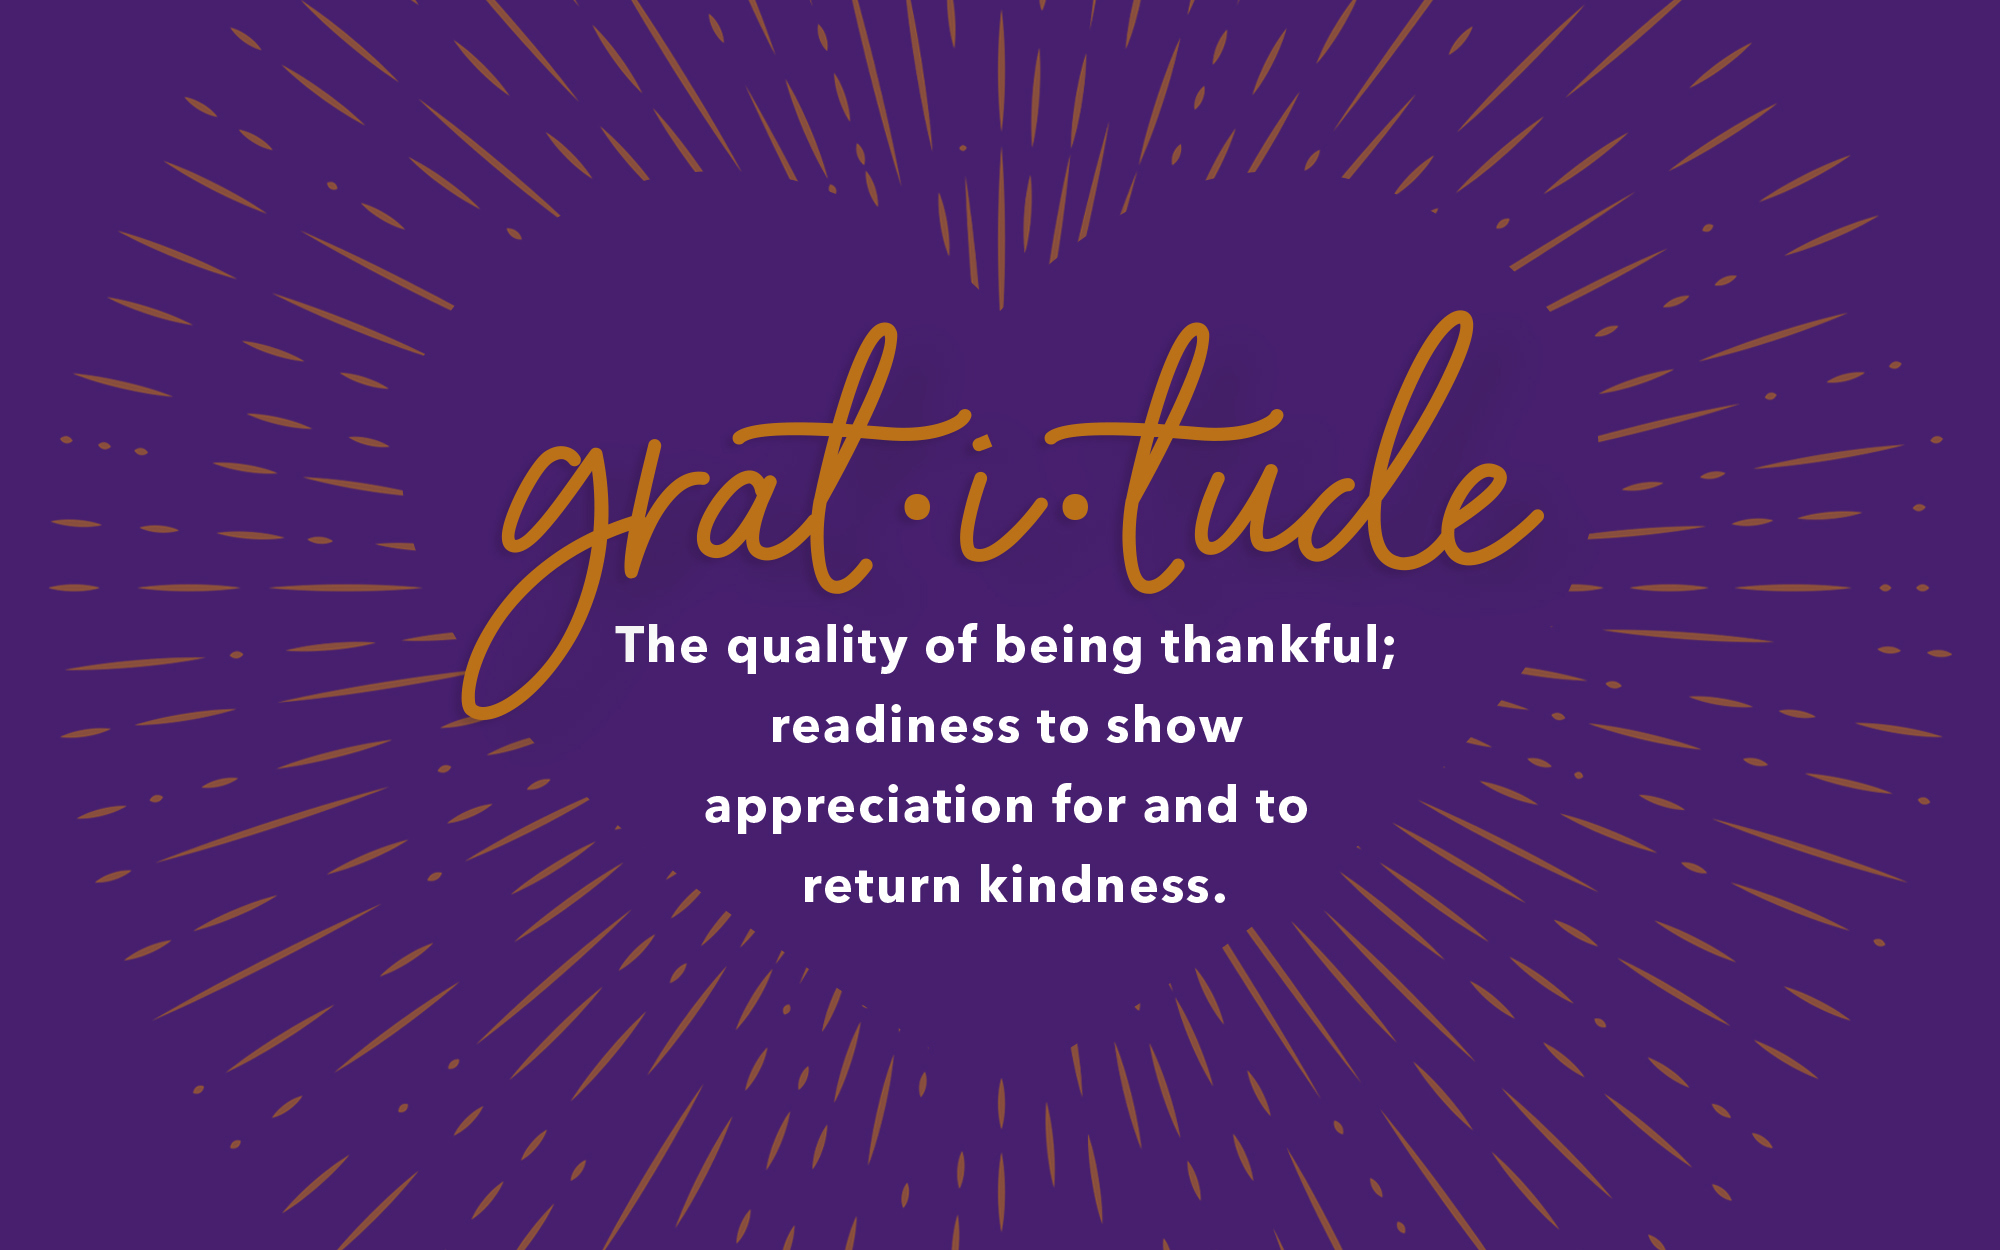 Gratitude is the quality of being thankful and returning it.